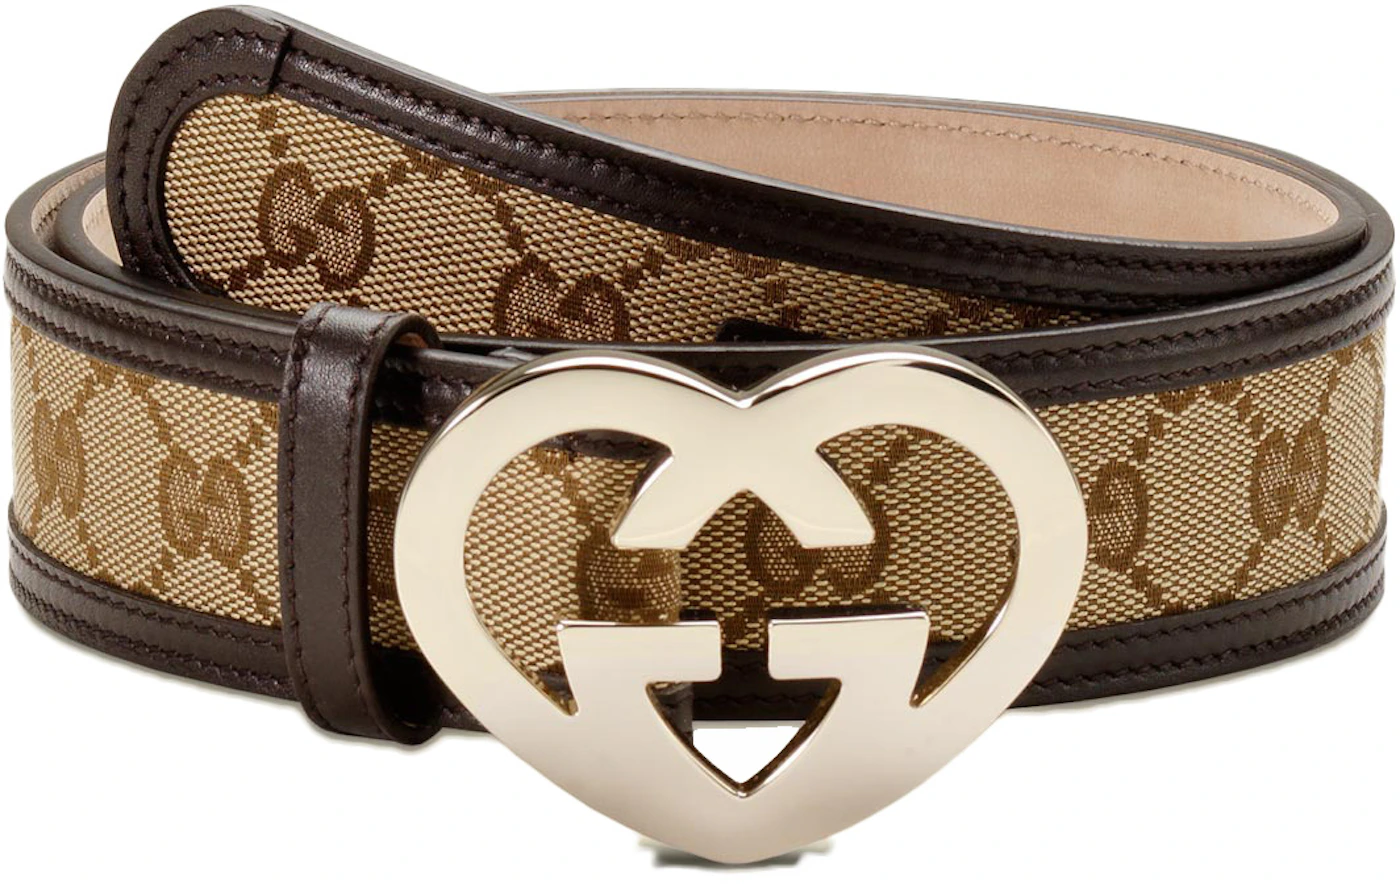 Gucci Belt GG Supreme Leather Trimmed 1.5W Beige/Ebony in Canvas